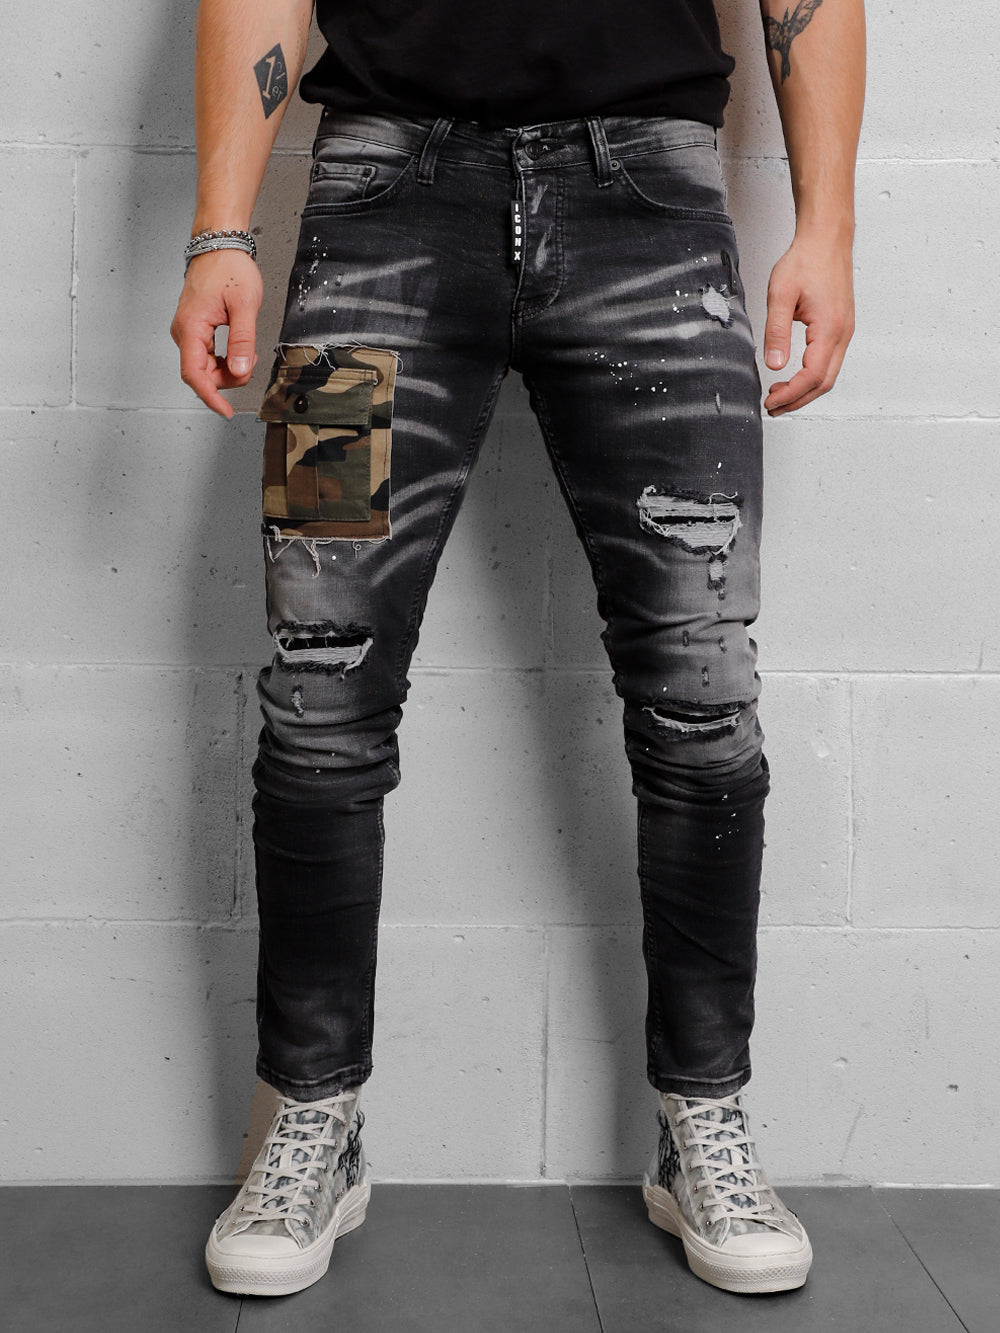 A man wearing ripped jeans and a CAMOUFLAGE | BLACK t - shirt.